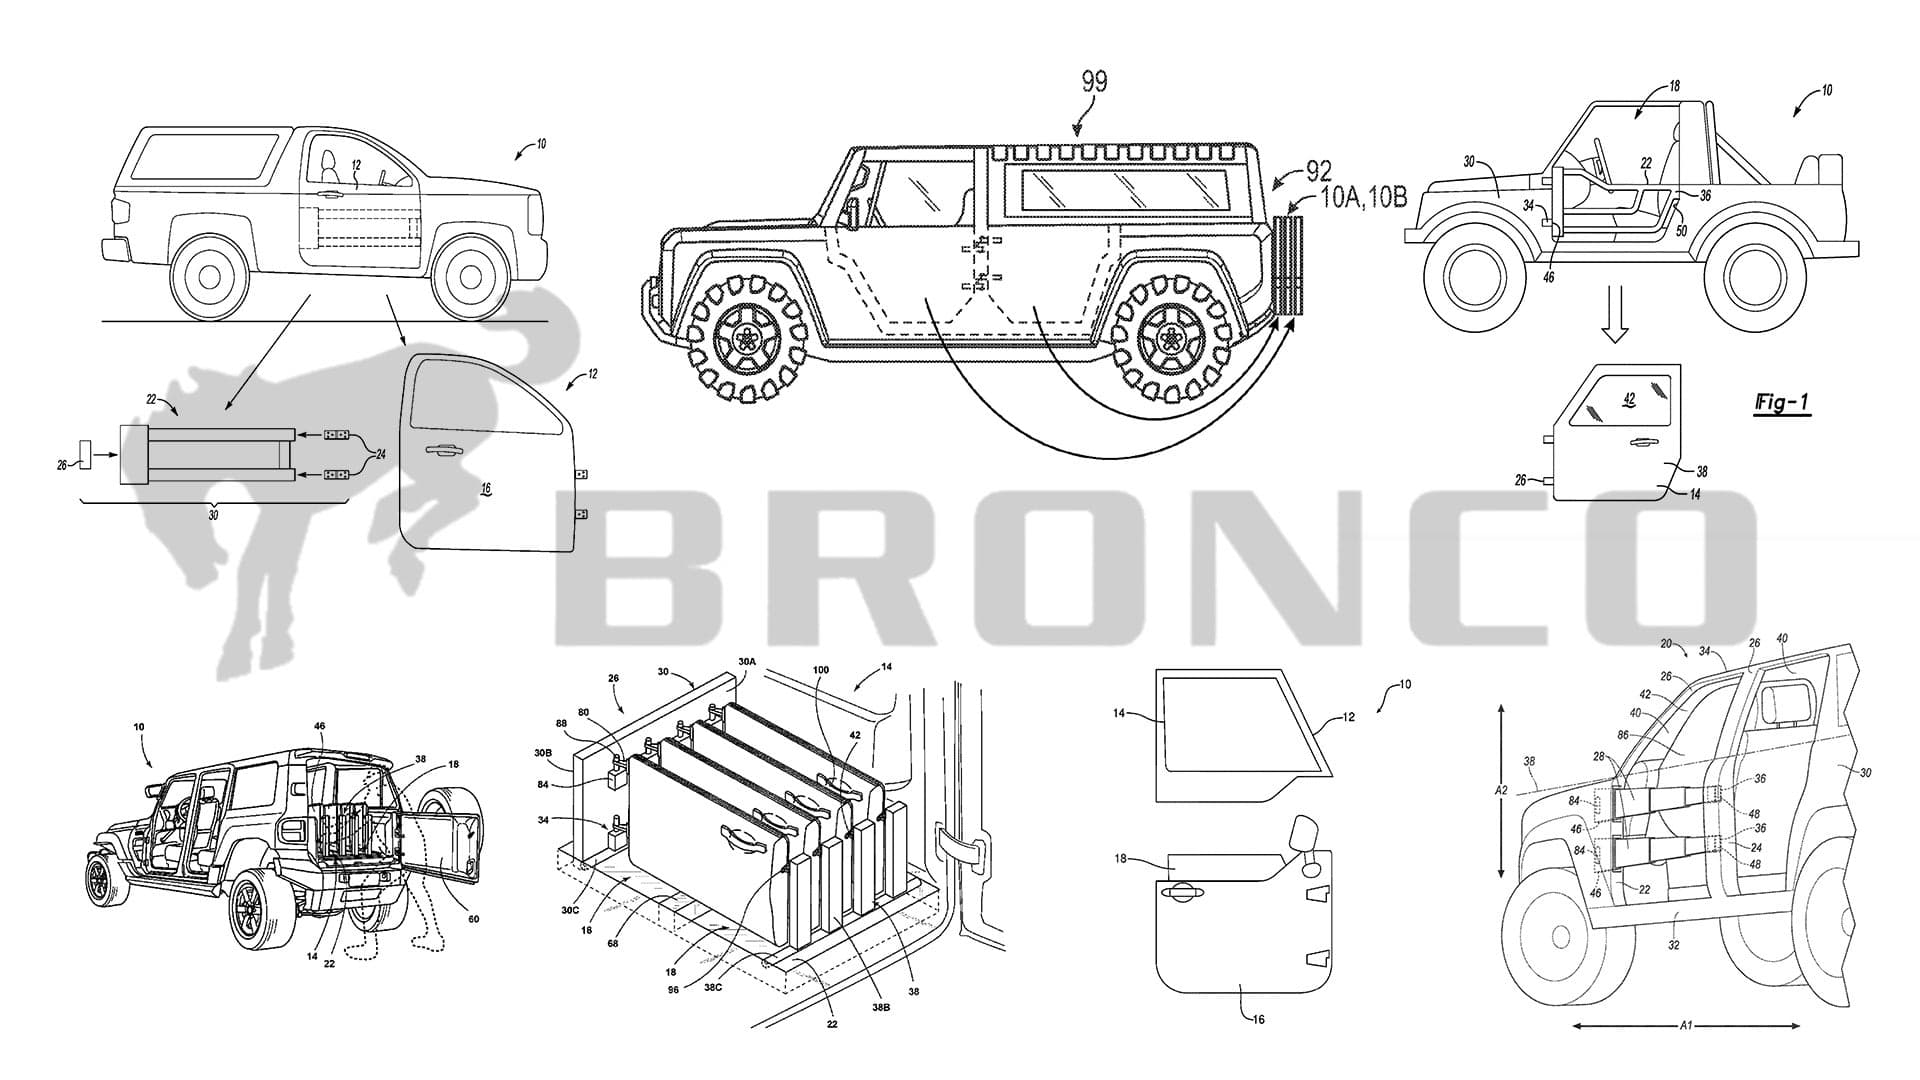 Ford Has Filed Nine Removable Door Patents Ahead of the 2021 Ford Bronco